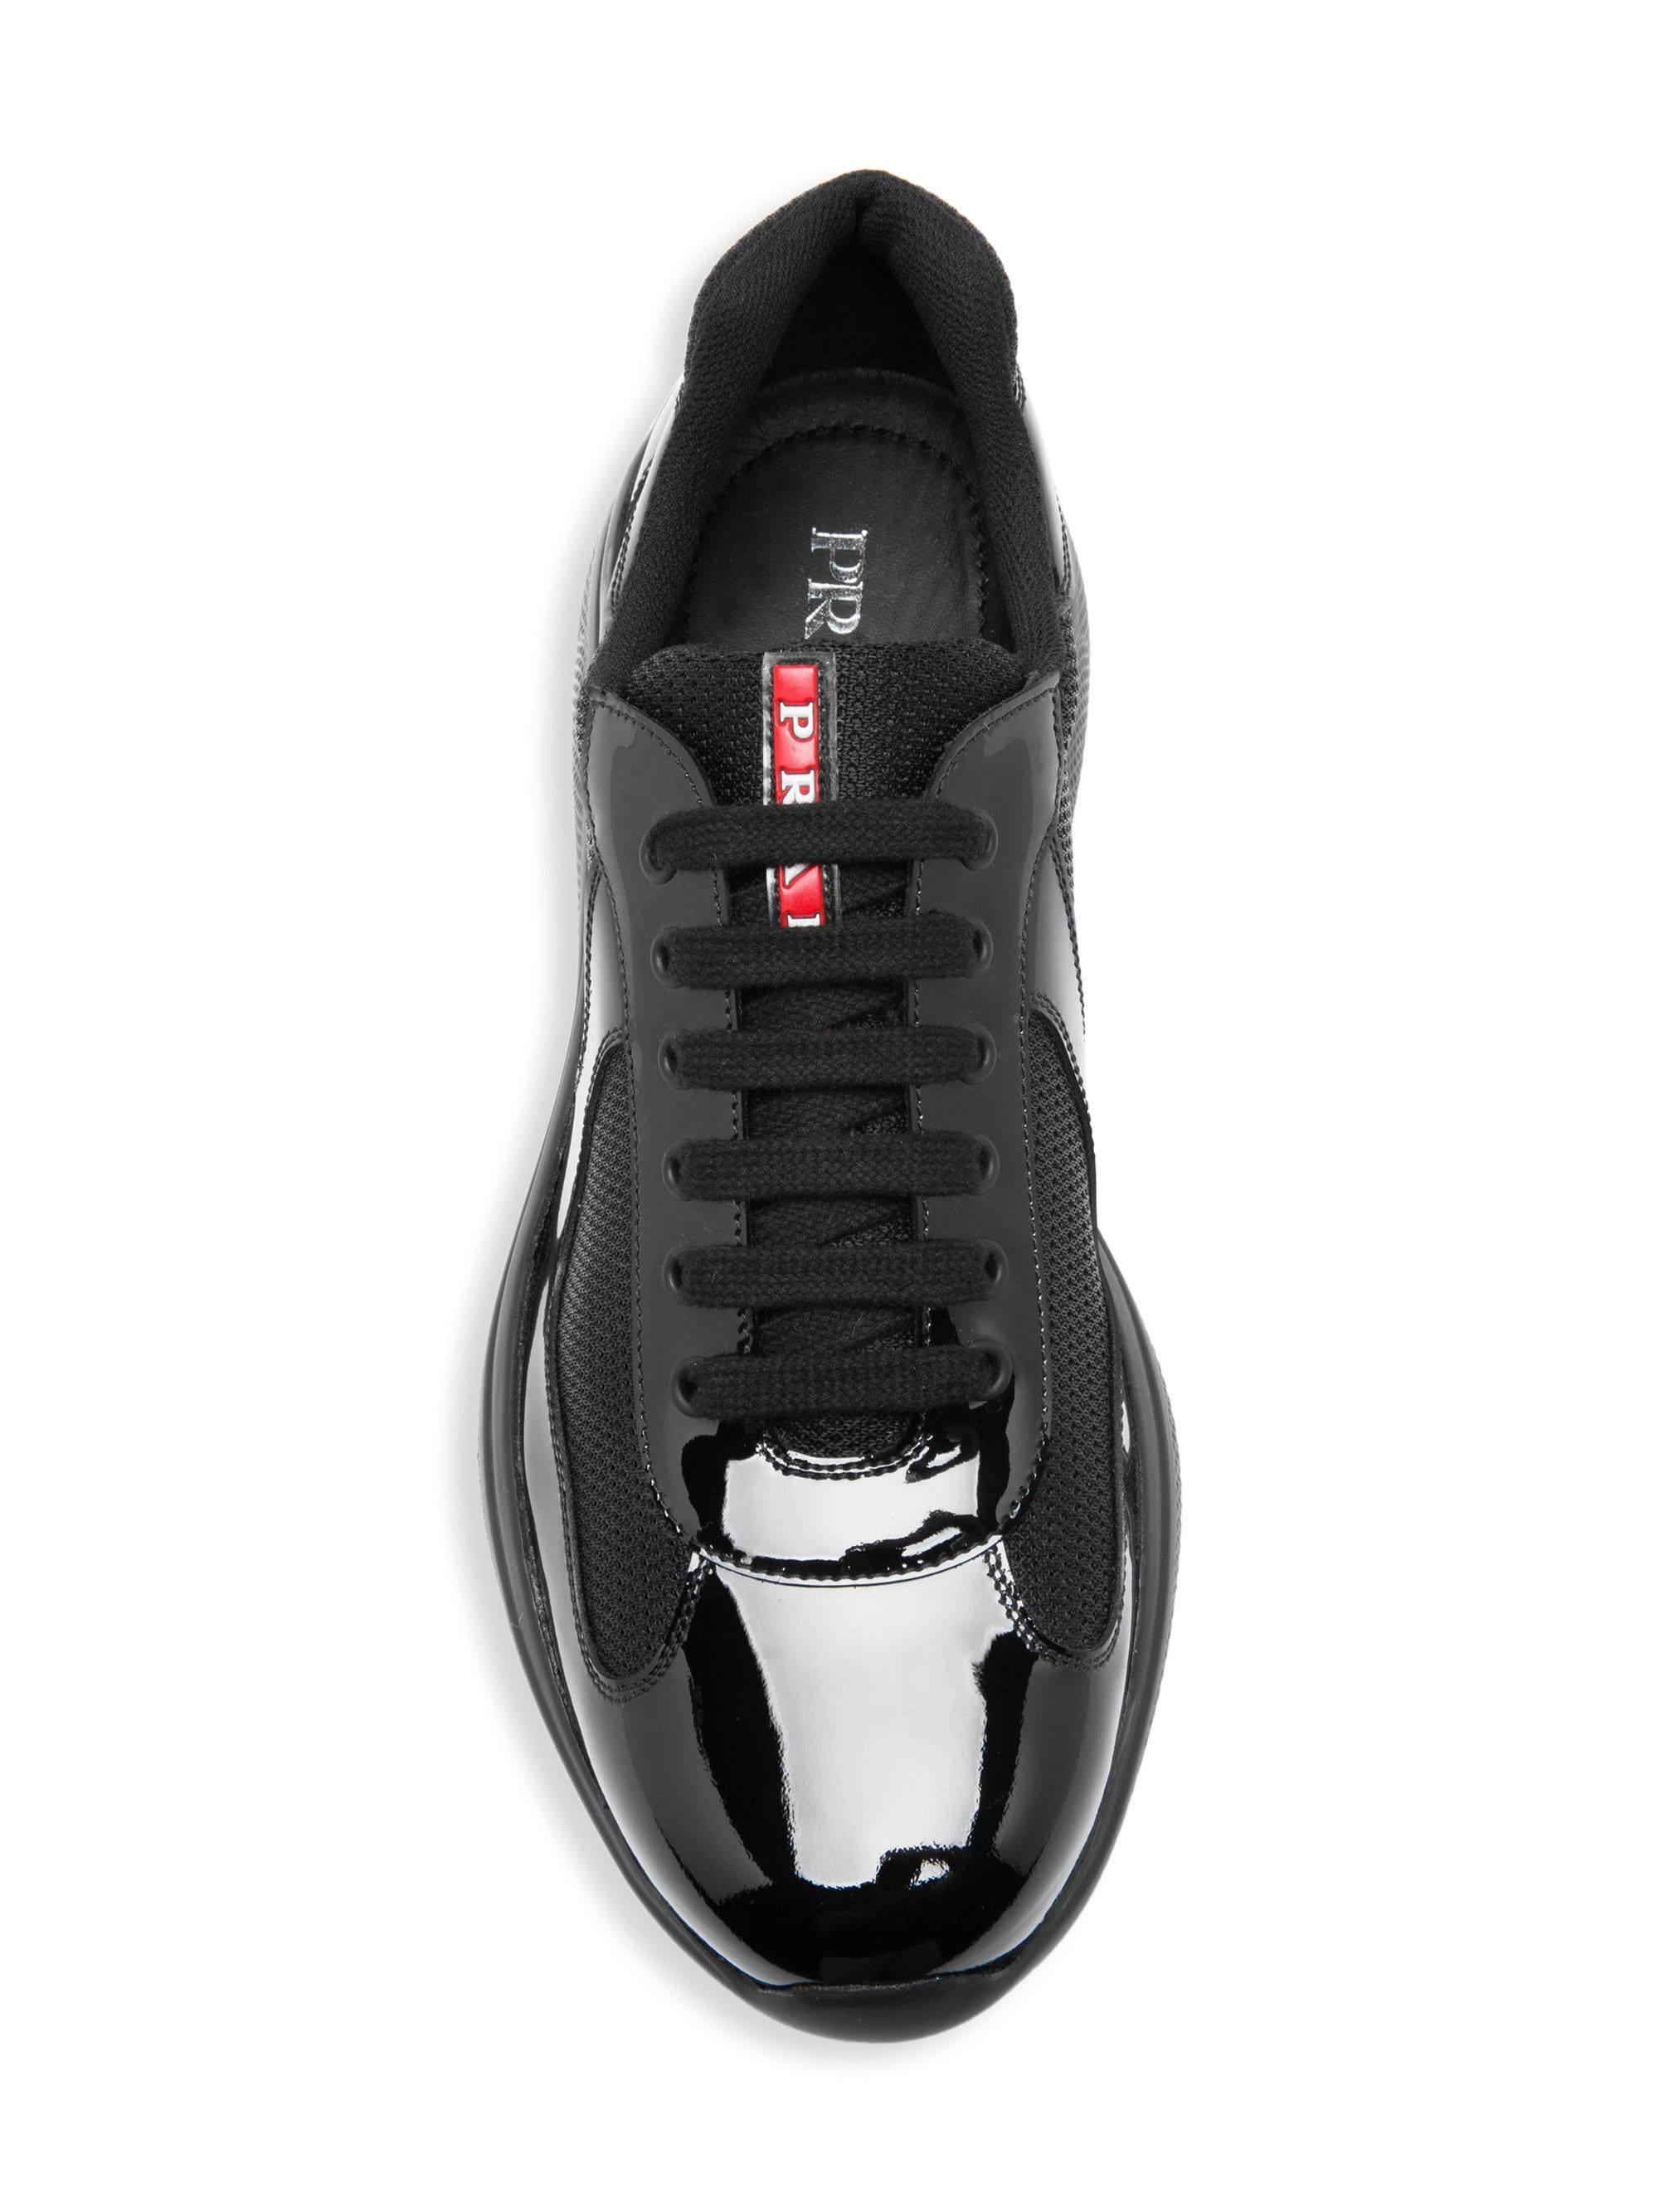 Prada America's Cup Patent Leather & Technical Fabric Sneakers in Nero  (Black) for Men | Lyst